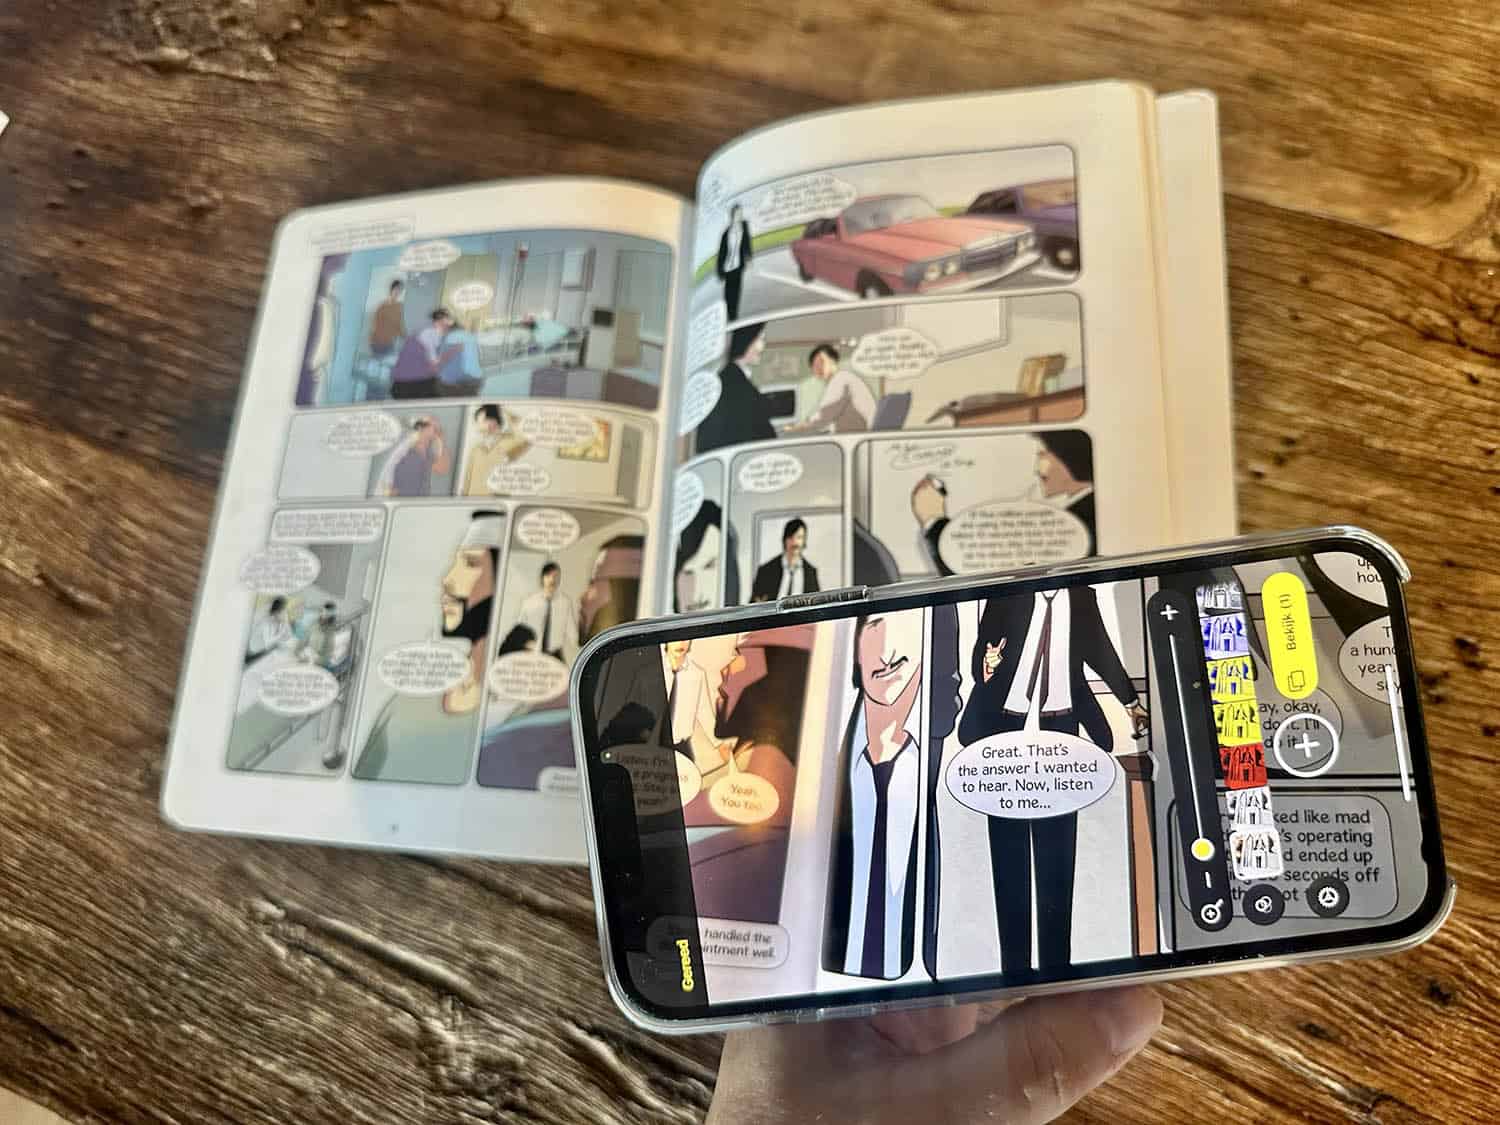 This way you can use the iPhone as a magnifying glass or reading glasses